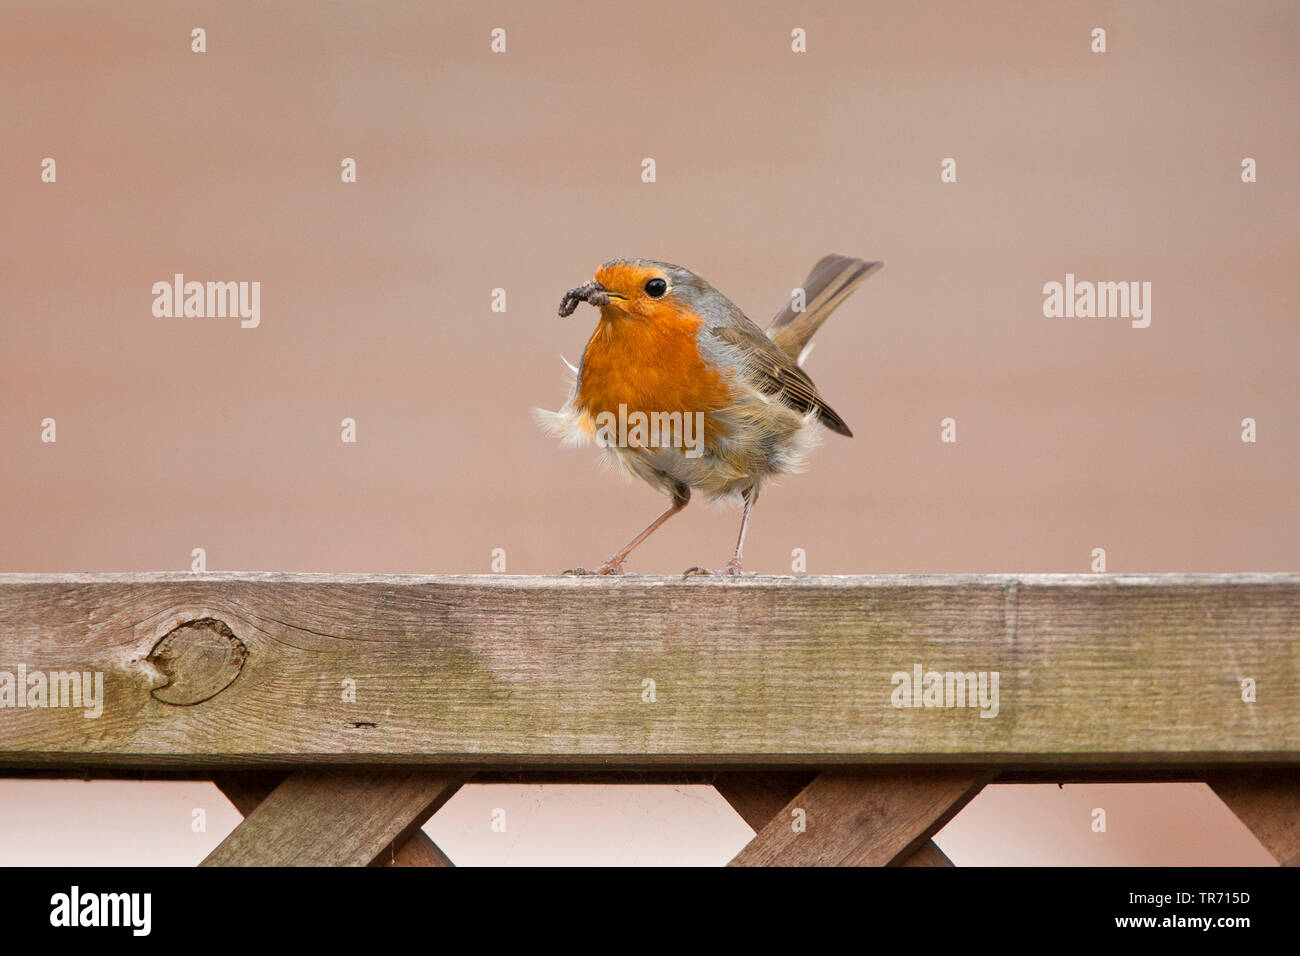 European robin (Erithacus rubecula), perched with food on a garden fench, Netherlands, South Holland, Katwijk Stock Photo